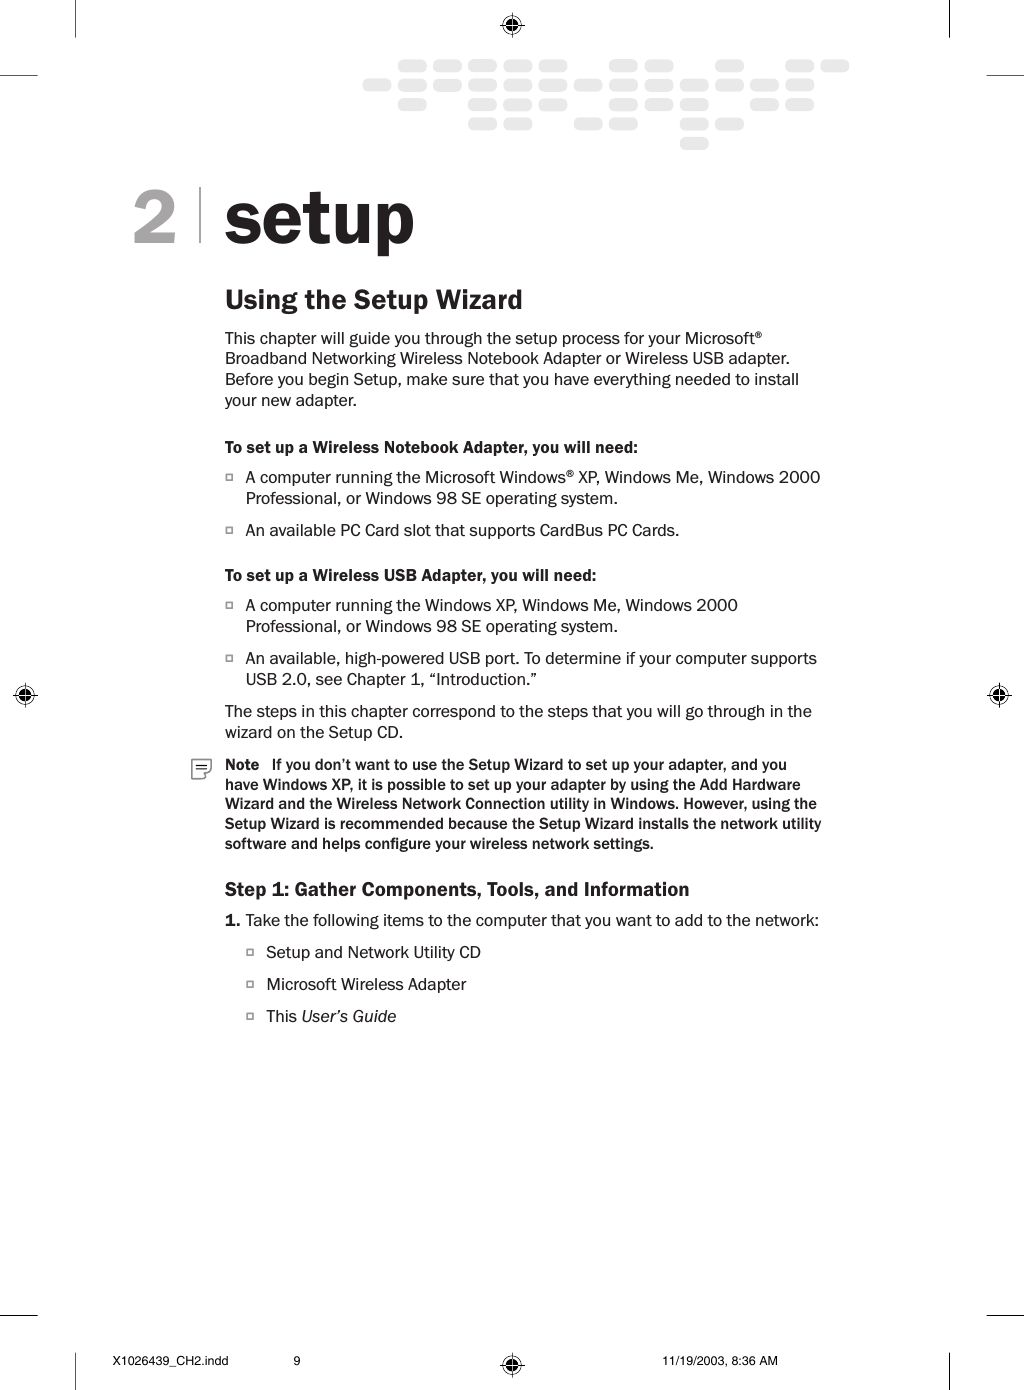 setupUsing the Setup WizardThis chapter will guide you through the setup process for your Microsoft® Broadband Networking Wireless Notebook Adapter or Wireless USB adapter. Before you begin Setup, make sure that you have everything needed to install your new adapter.To set up a Wireless Notebook Adapter, you will need:O  A computer running the Microsoft Windows® XP, Windows Me, Windows 2000 Professional, or Windows 98 SE operating system.O  An available PC Card slot that supports CardBus PC Cards.To set up a Wireless USB Adapter, you will need:O  A computer running the Windows XP, Windows Me, Windows 2000 Professional, or Windows 98 SE operating system.O  An available, high-powered USB port. To determine if your computer supports USB 2.0, see Chapter 1, “Introduction.” The steps in this chapter correspond to the steps that you will go through in the wizard on the Setup CD.  Note   If you don’t want to use the Setup Wizard to set up your adapter, and you have Windows XP, it is possible to set up your adapter by using the Add Hardware Wizard and the Wireless Network Connection utility in Windows. However, using the Setup Wizard is recommended because the Setup Wizard installs the network utility software and helps congure your wireless network settings. Step 1: Gather Components, Tools, and Information1. Take the following items to the computer that you want to add to the network:O  Setup and Network Utility CDO  Microsoft Wireless AdapterO  This User’s Guide2X1026439_CH2.indd 11/19/2003, 8:36 AM9